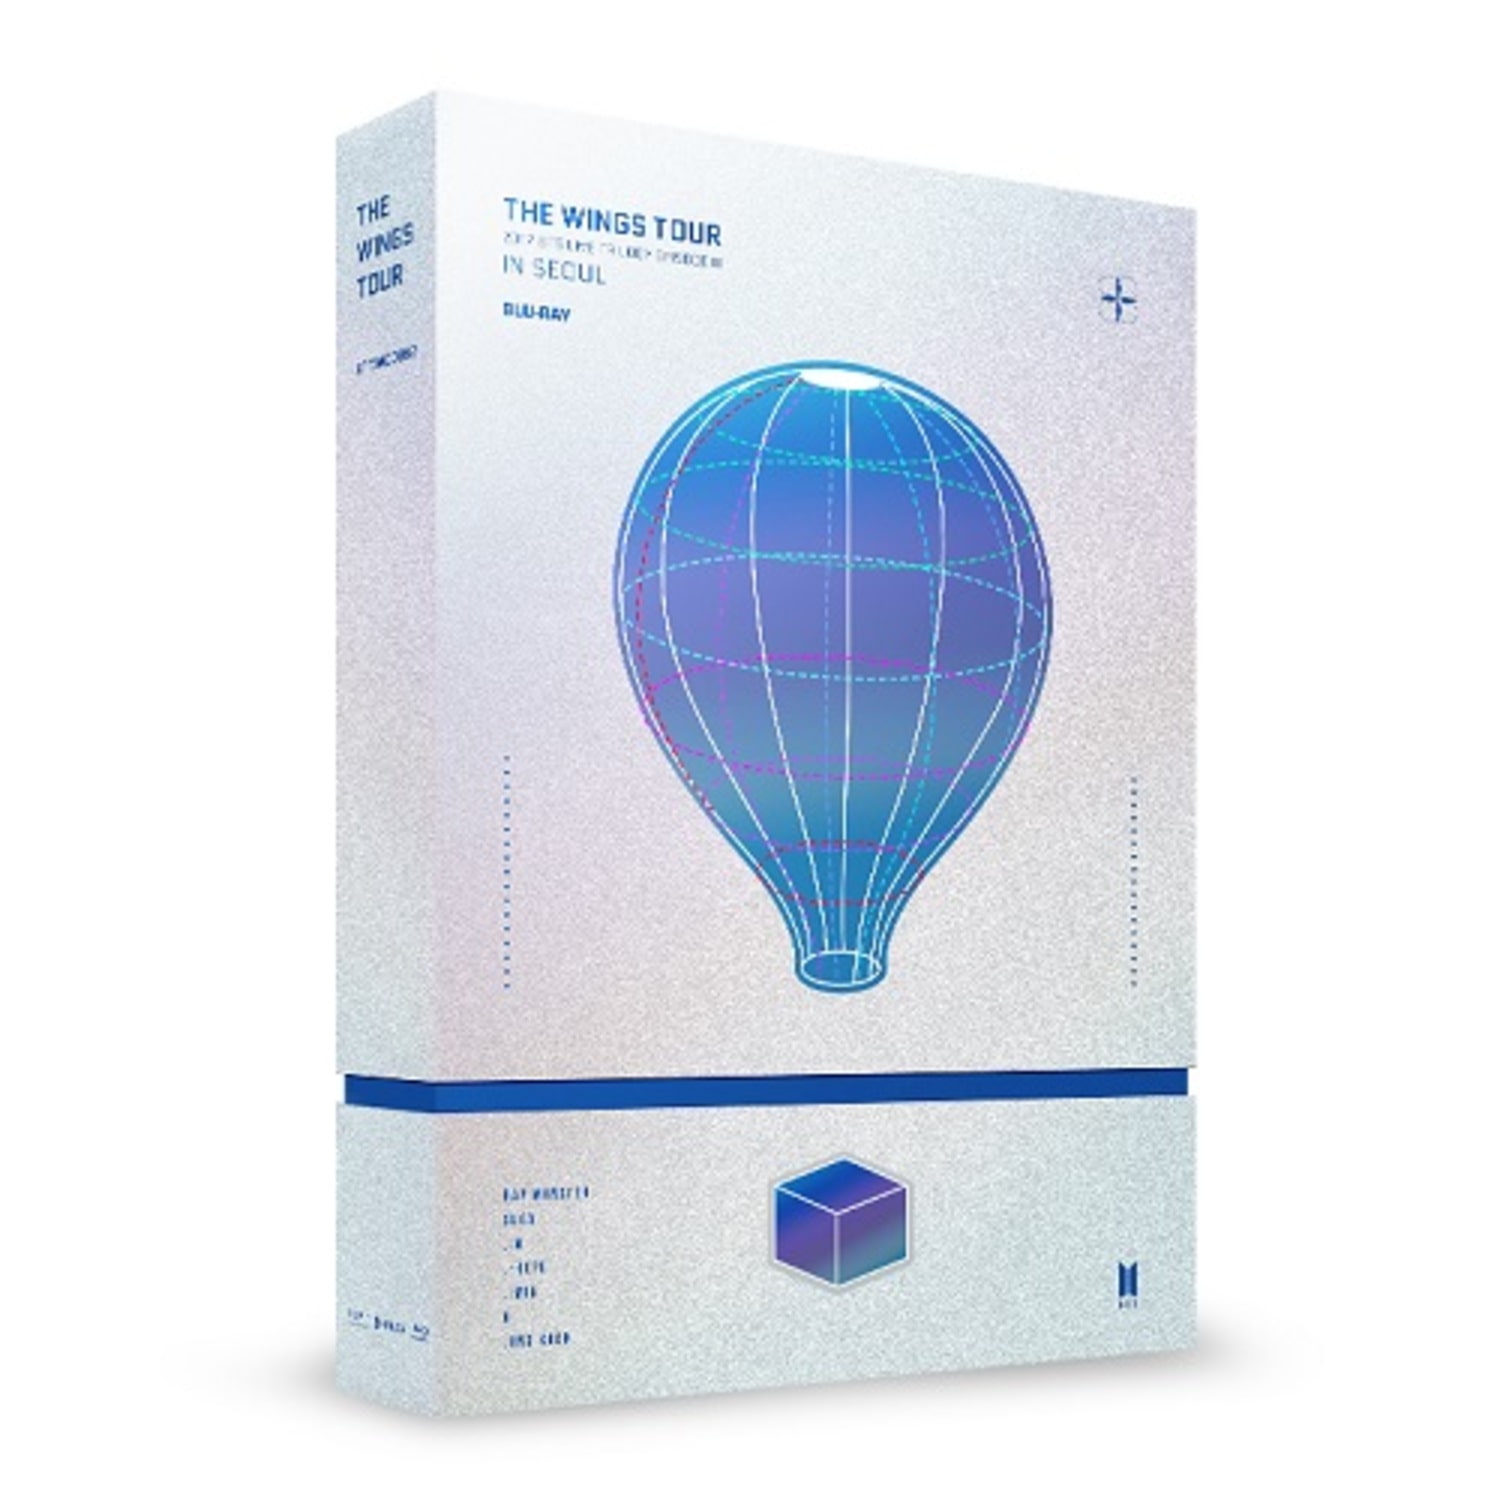 BTS(방탄소년단) - 2017 BTS Live Trilogy EPISODE III  THE WINGS TOUR in Seoul CONCERT Blu-ray